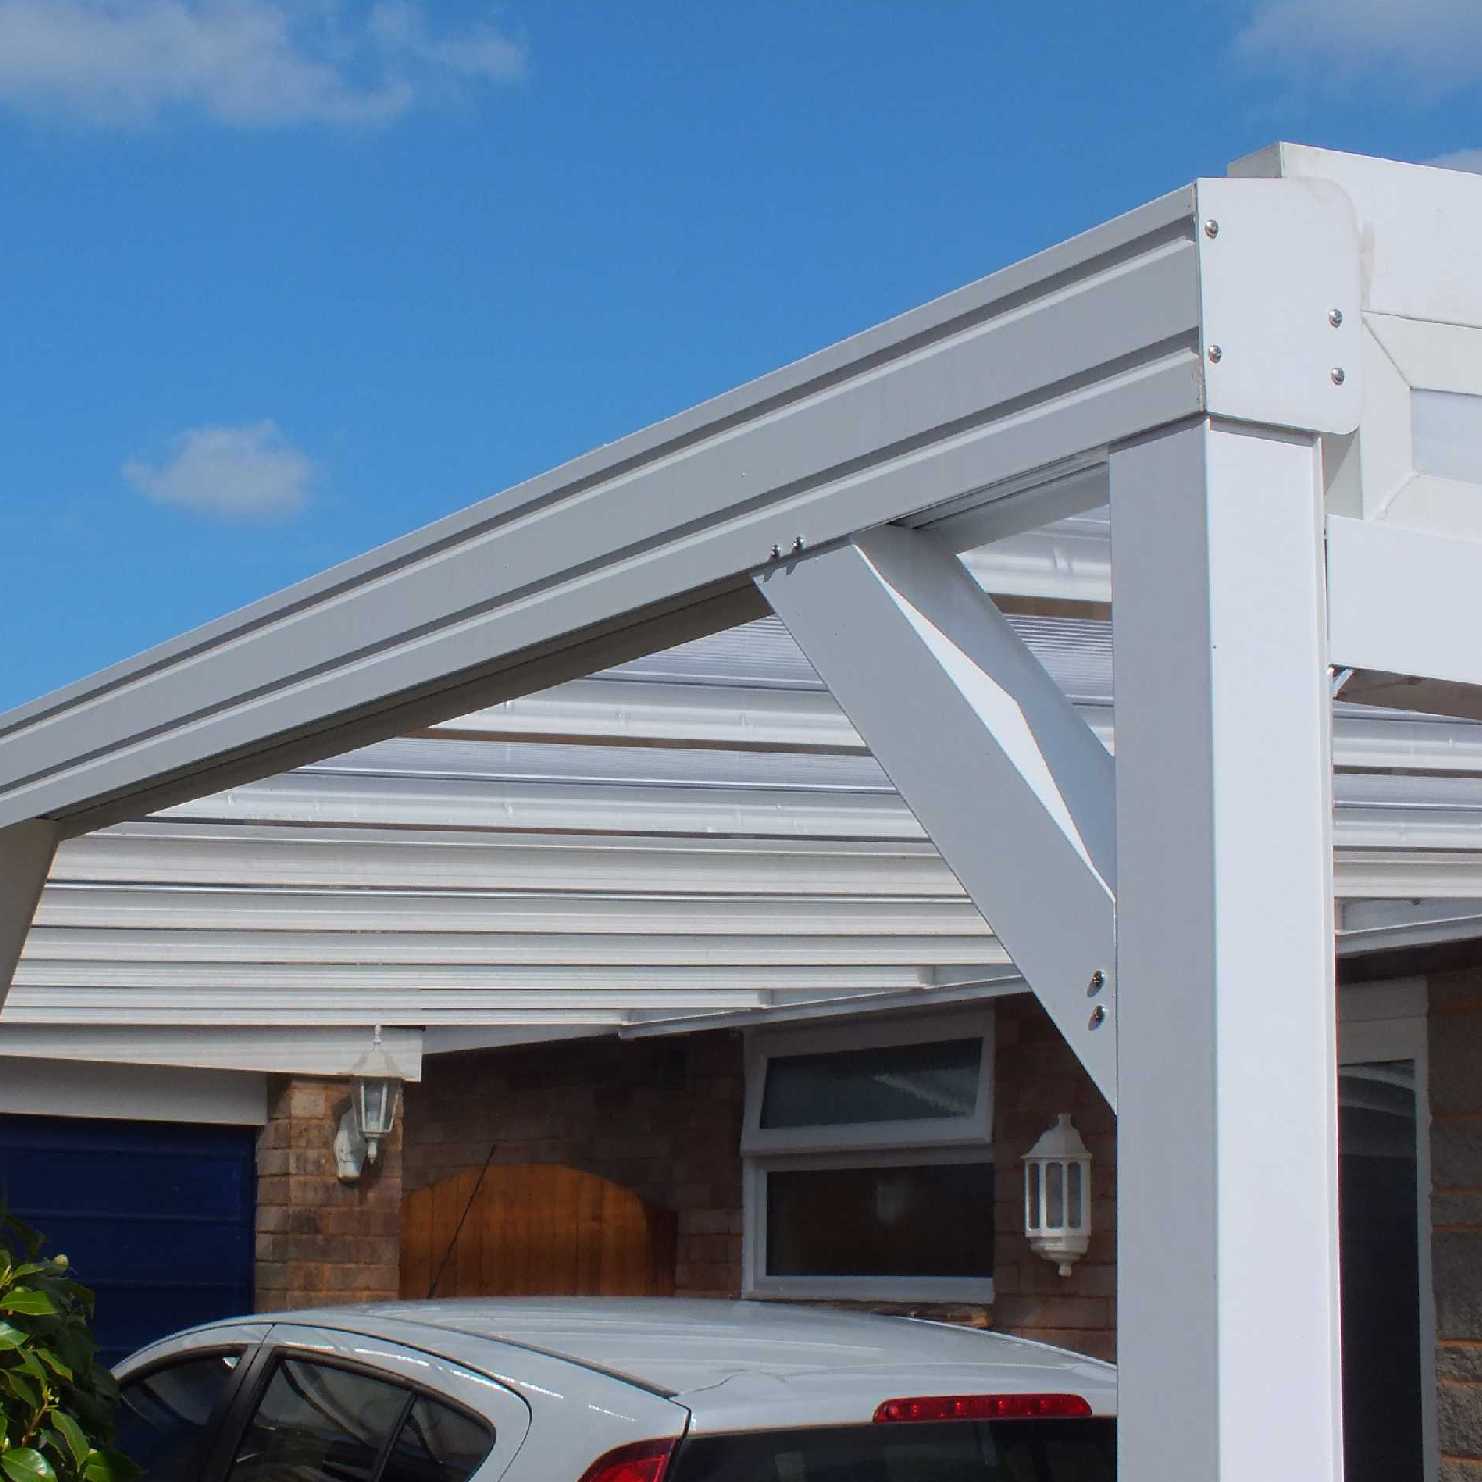 Buy Omega Smart Lean-To Canopy, White with 16mm Polycarbonate Glazing - 5.6m (W) x 4.0m (P), (3) Supporting Posts online today